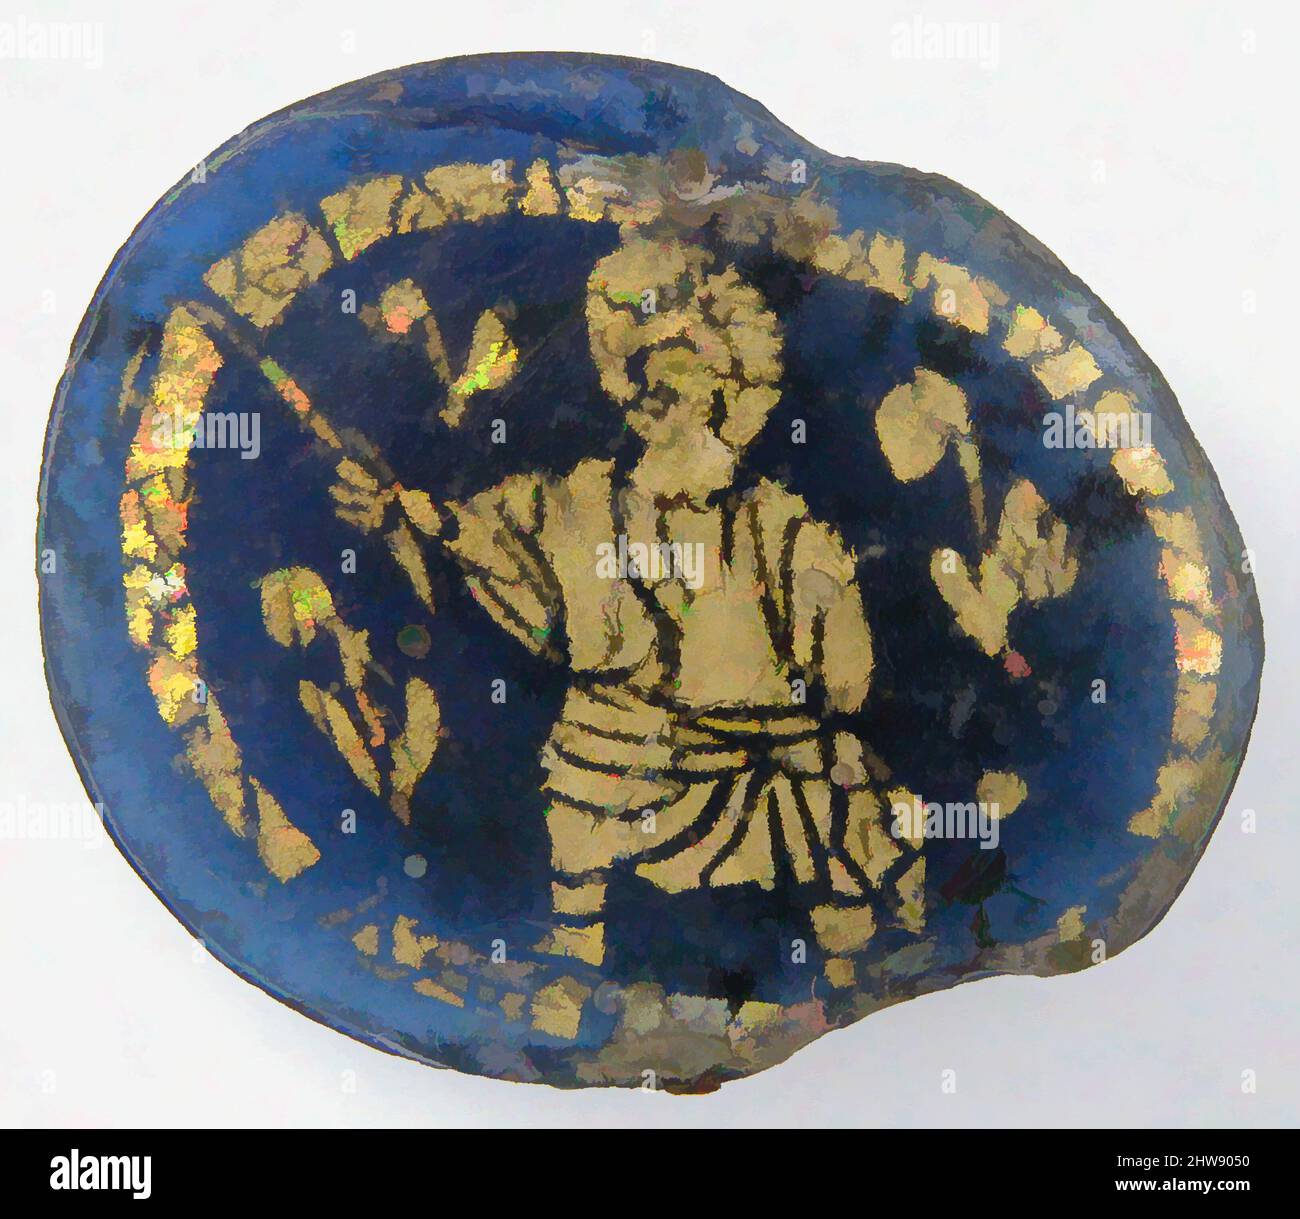 Art inspired by Gold Glass Medallion with Christ as a Miracle Worker, 300–500, Roman or Byzantine, Glass, gold leaf, Overall: 13/16 x 1 x 3/16 in. (2.1 x 2.5 x 0.5 cm), Glass-Gold glass, Among the earliest popular depictions of Christ were those recalling Roman images of magicians, Classic works modernized by Artotop with a splash of modernity. Shapes, color and value, eye-catching visual impact on art. Emotions through freedom of artworks in a contemporary way. A timeless message pursuing a wildly creative new direction. Artists turning to the digital medium and creating the Artotop NFT Stock Photo